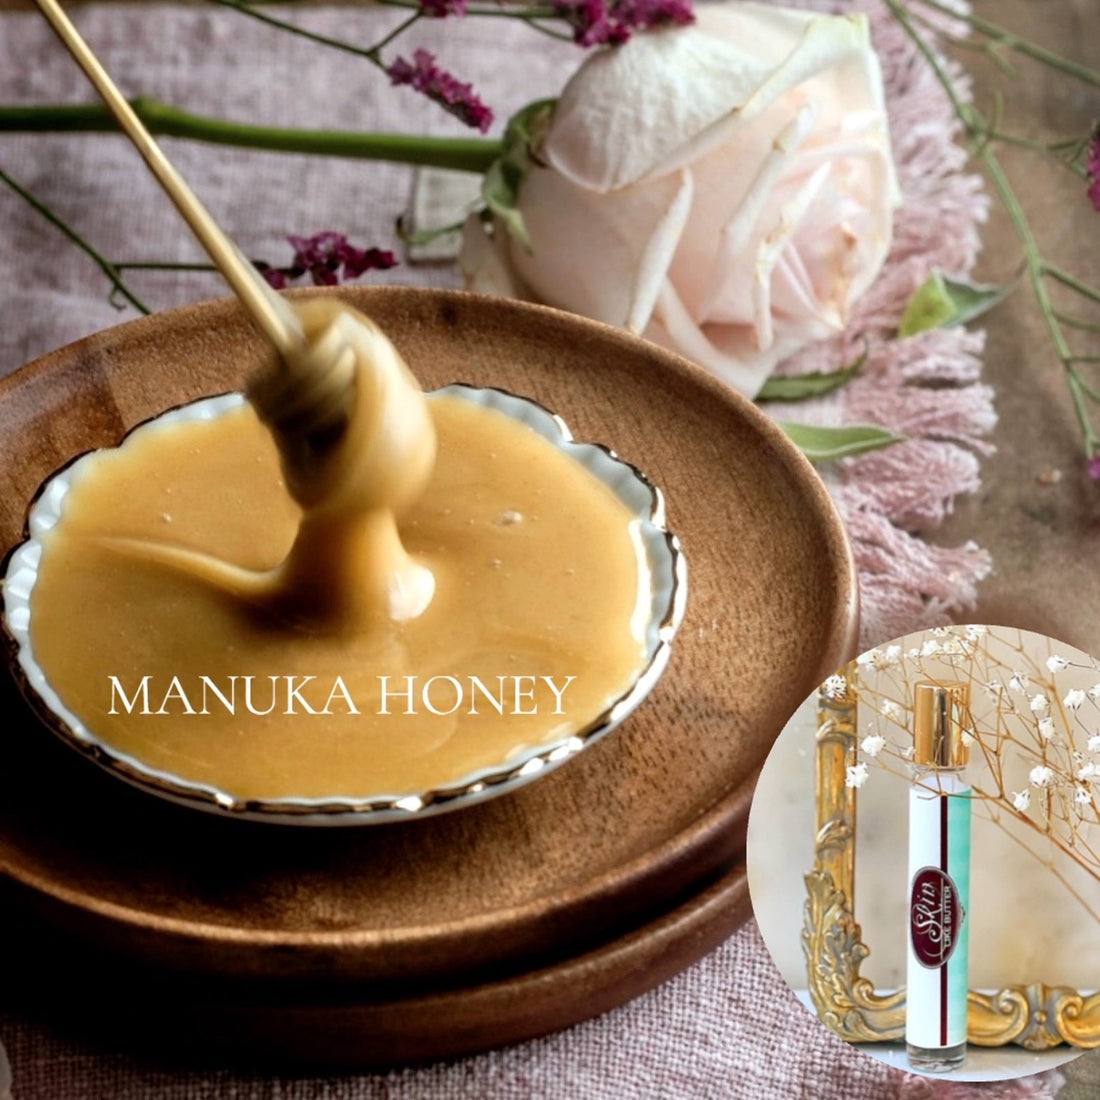 MANUKA HONEY Roll on Perfume Sale! ~ Buy 1 get 1 50% off-use coupon code 2PLEASE